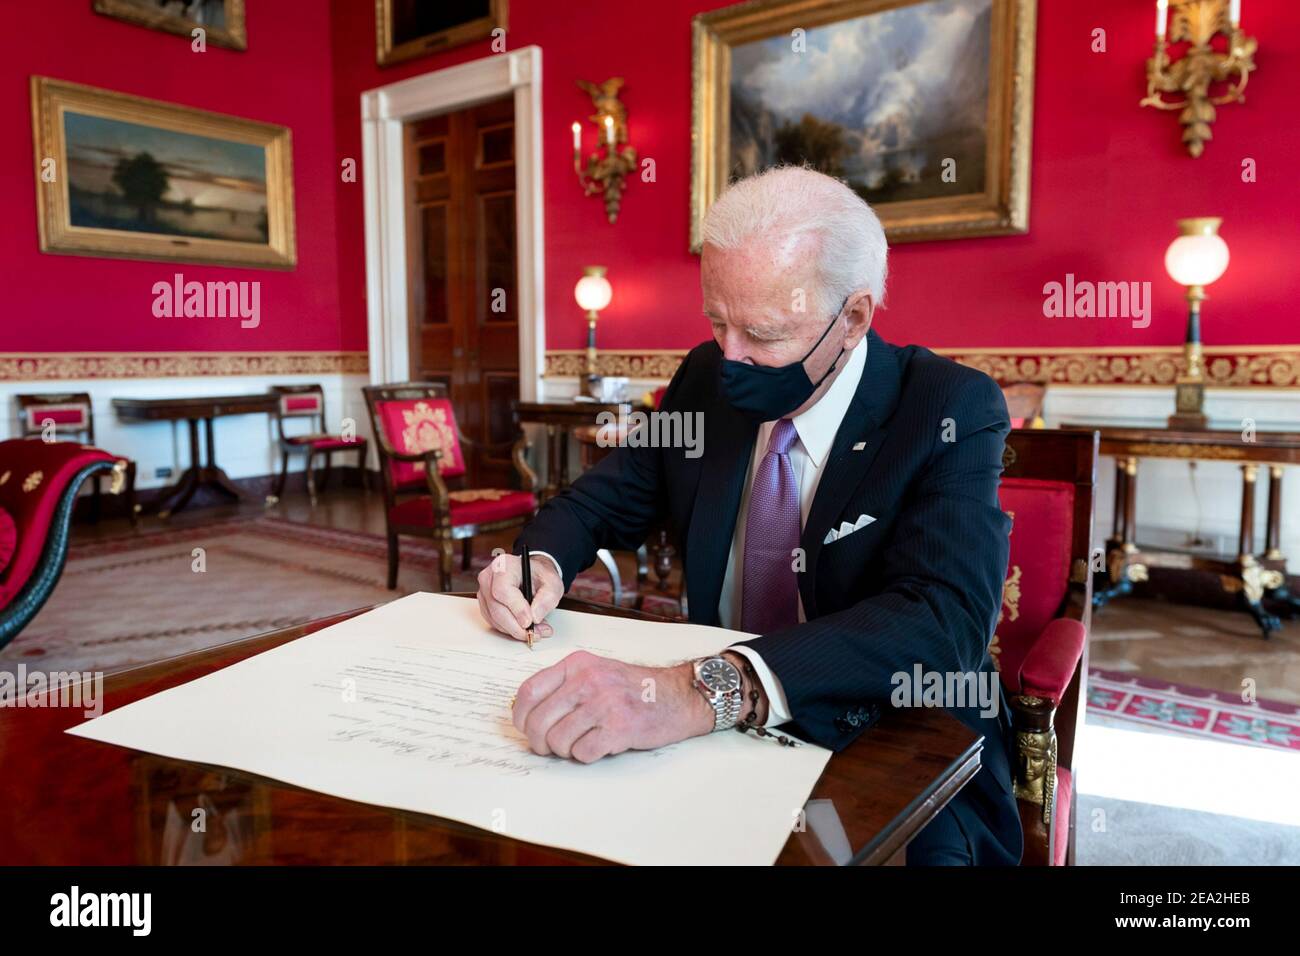 U.S President Joe Biden signs the commission for Avril Haines to be the Director of National Intelligence in the Red Room of the White House January 21, 2021 in Washington, D.C. Stock Photo